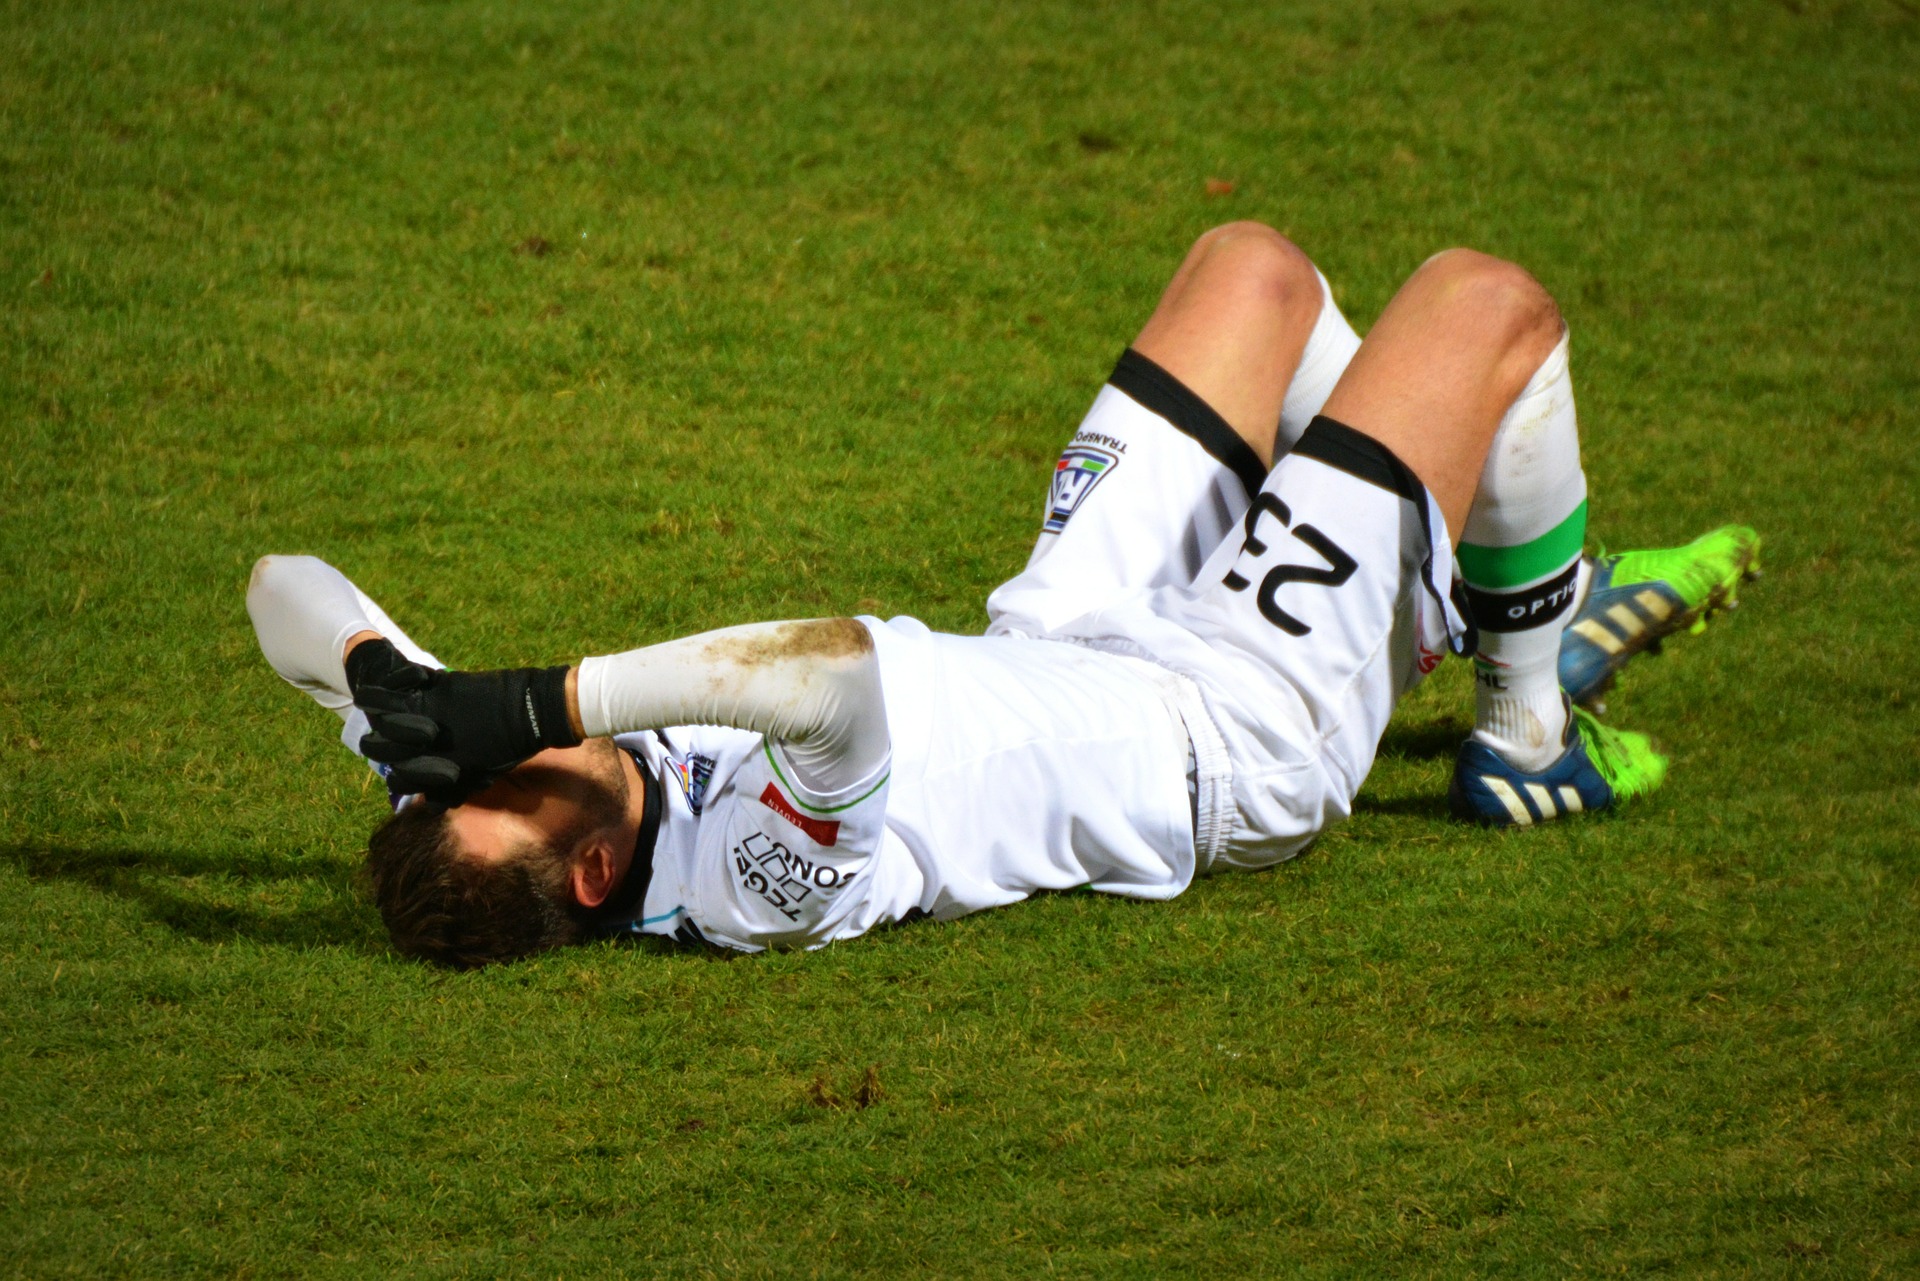 5 Most Common Football Related Injuries in Adults